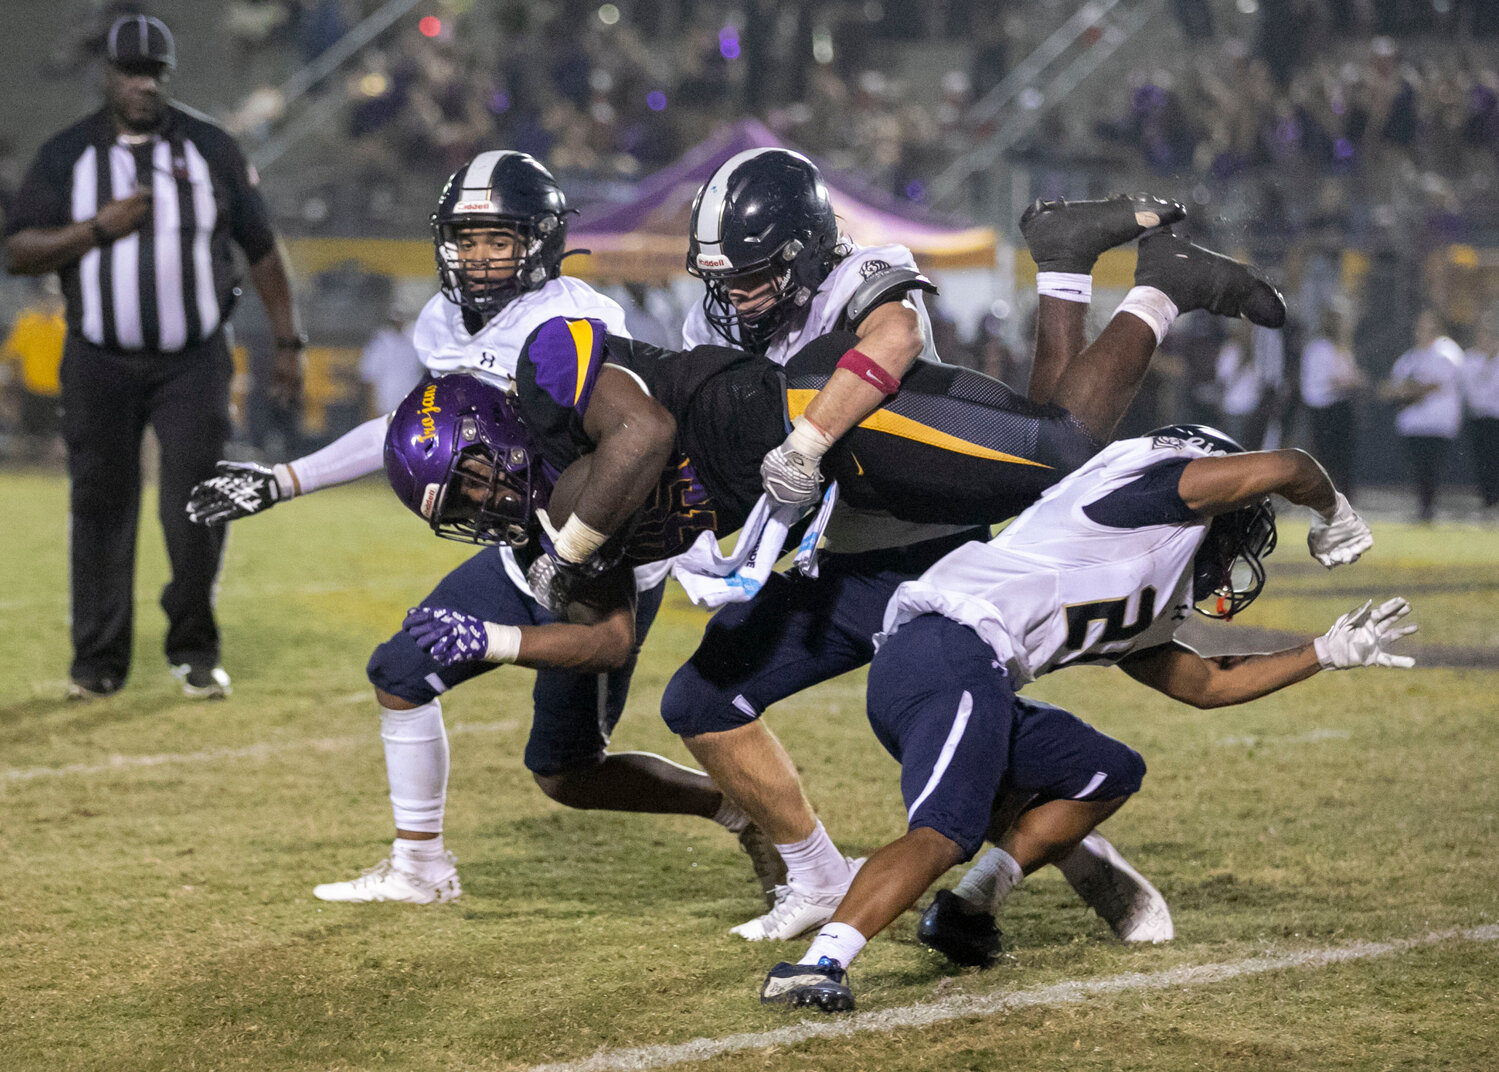 Foley senior Greg McGowan (21) is joined by junior Sam McClellan (43) and senior Andre Purdie (10) in upending Daphne senior Nick Clark (45) on a run during the second half of the Class 7A Region 1 game between the Lions and Trojans at Jubilee Stadium on Friday, Oct. 27.